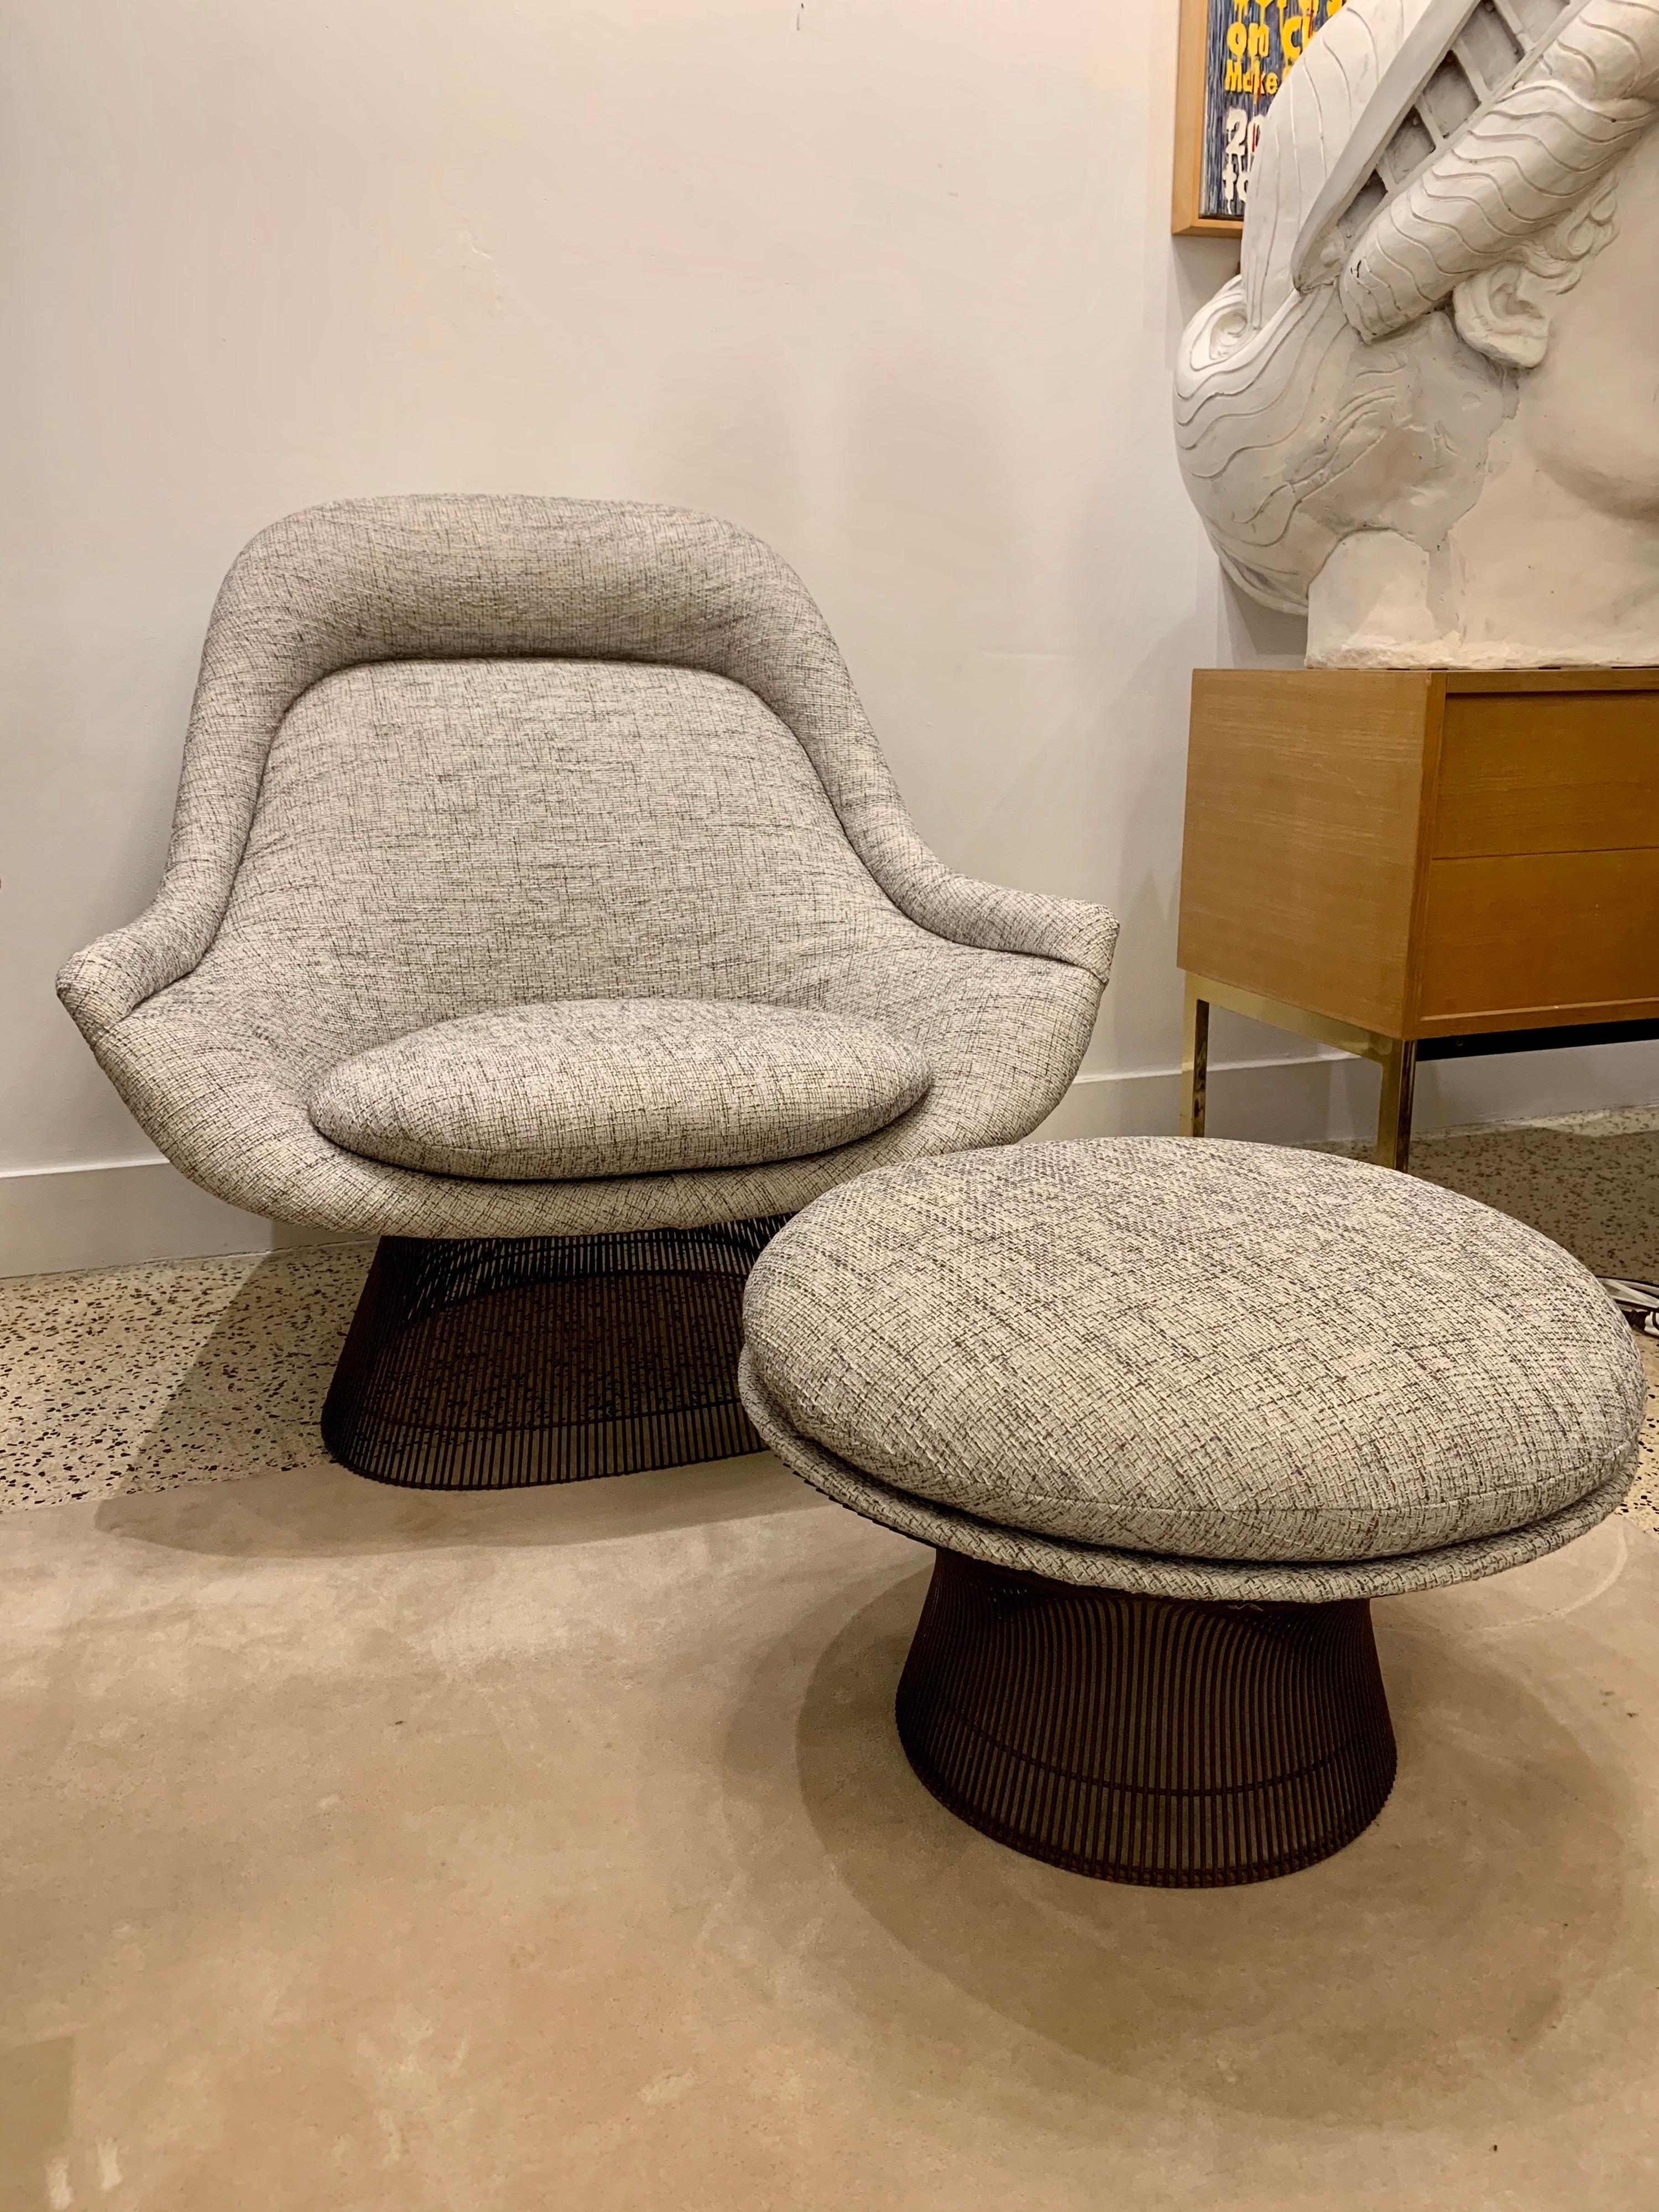 Fabric Warren Platner Easy Lounge Chair and Ottoman